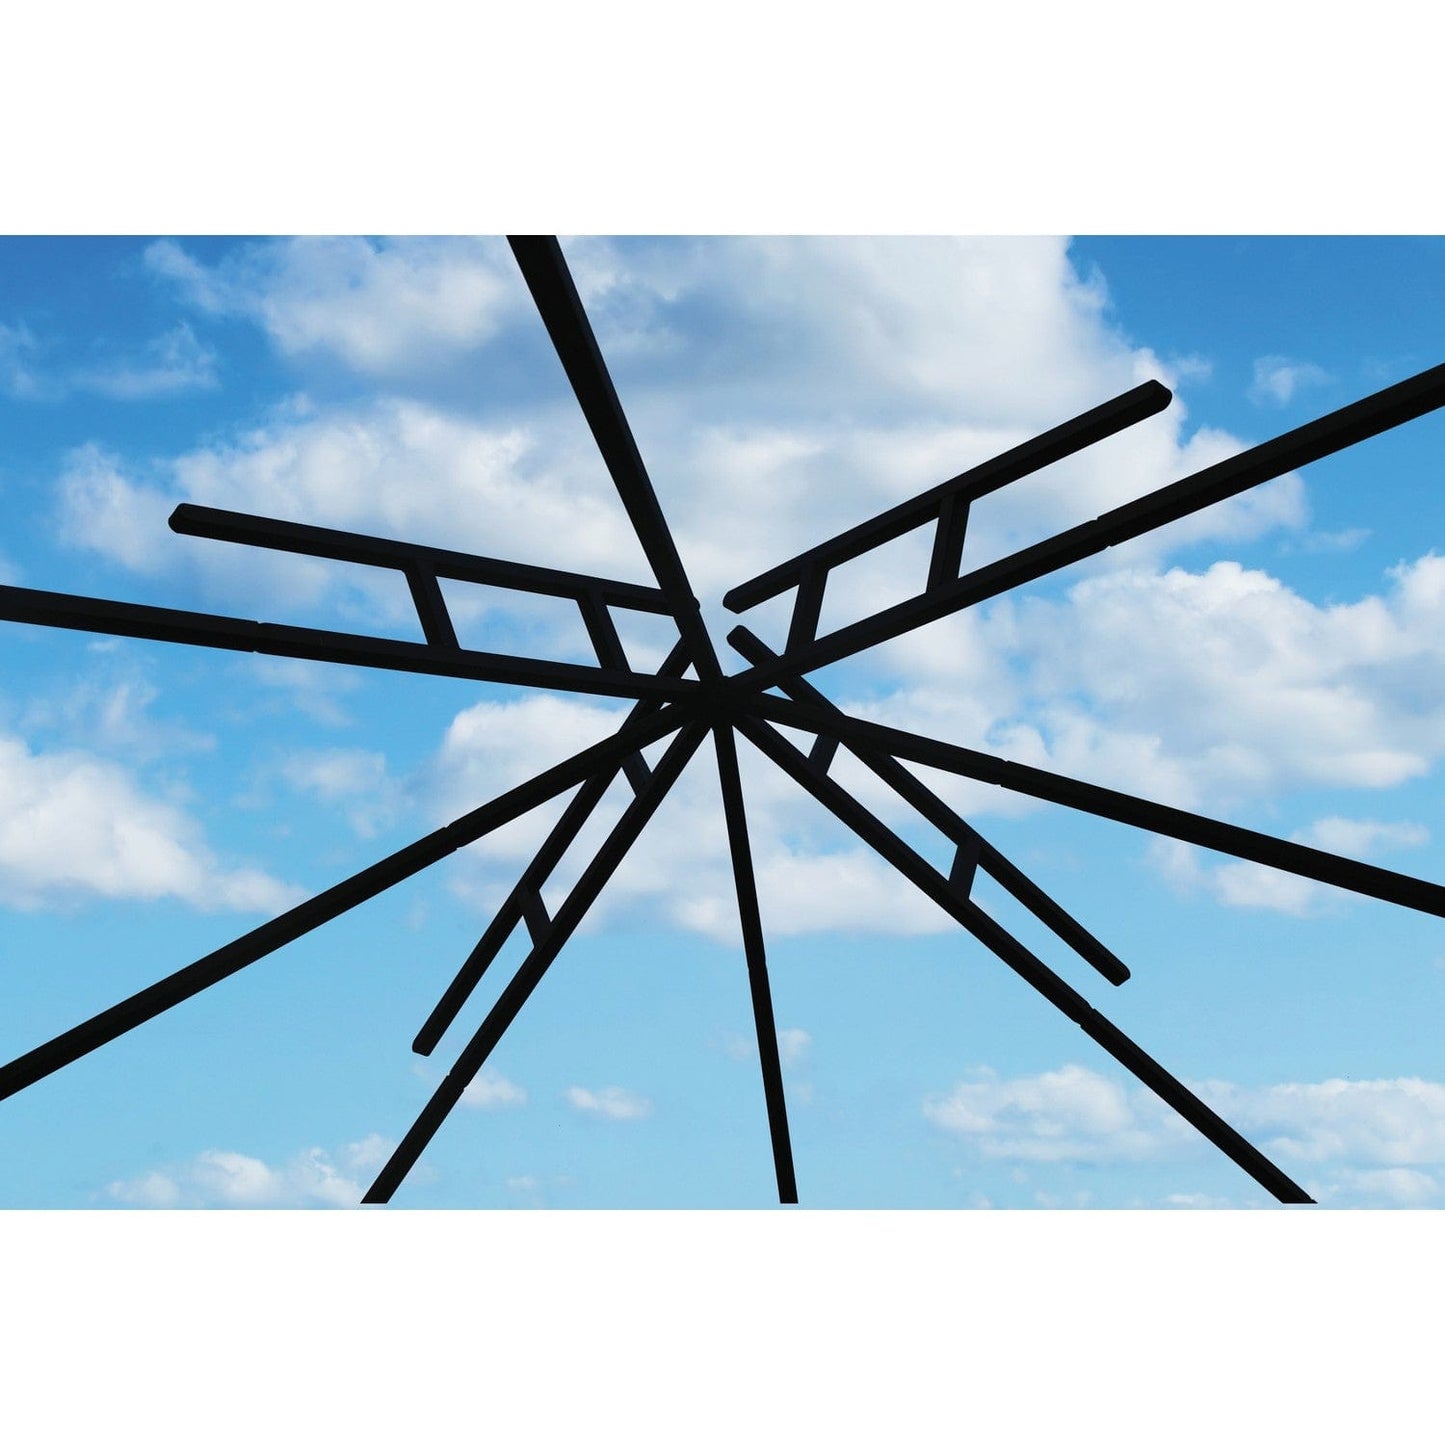 Riverstone Industries Soft Top Gazebos Riverstone | ACACIA Gazebo Roof Framing and Mounting Kit With OutDURA Canopy - Stone